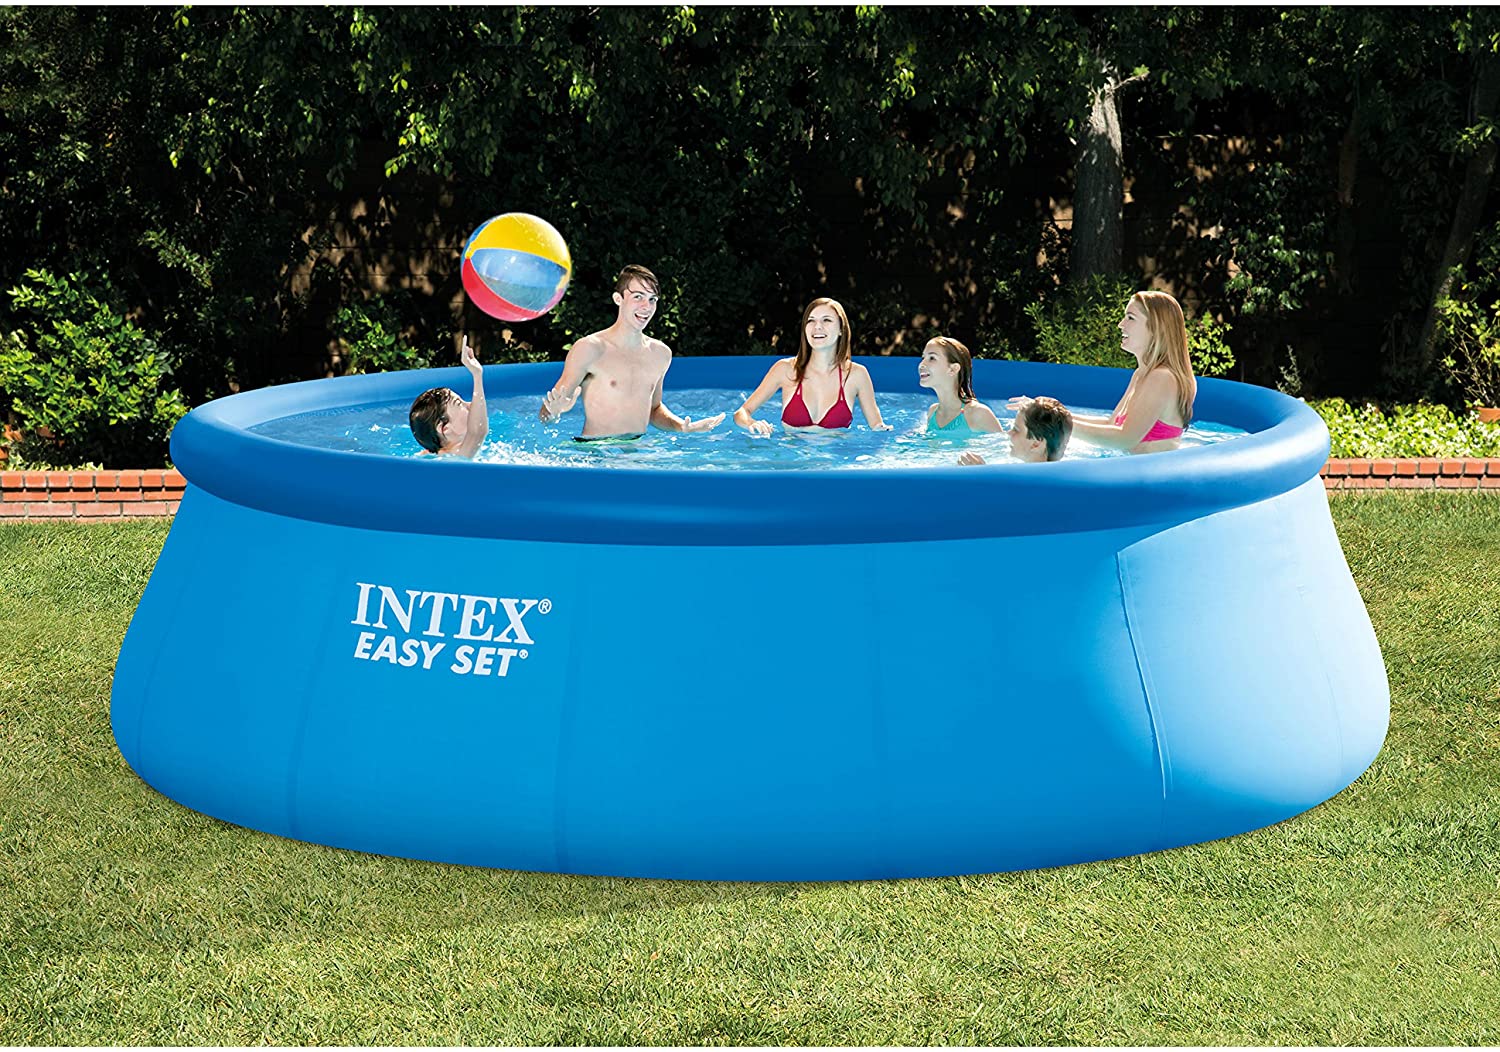 Prime Day Deals on Pools